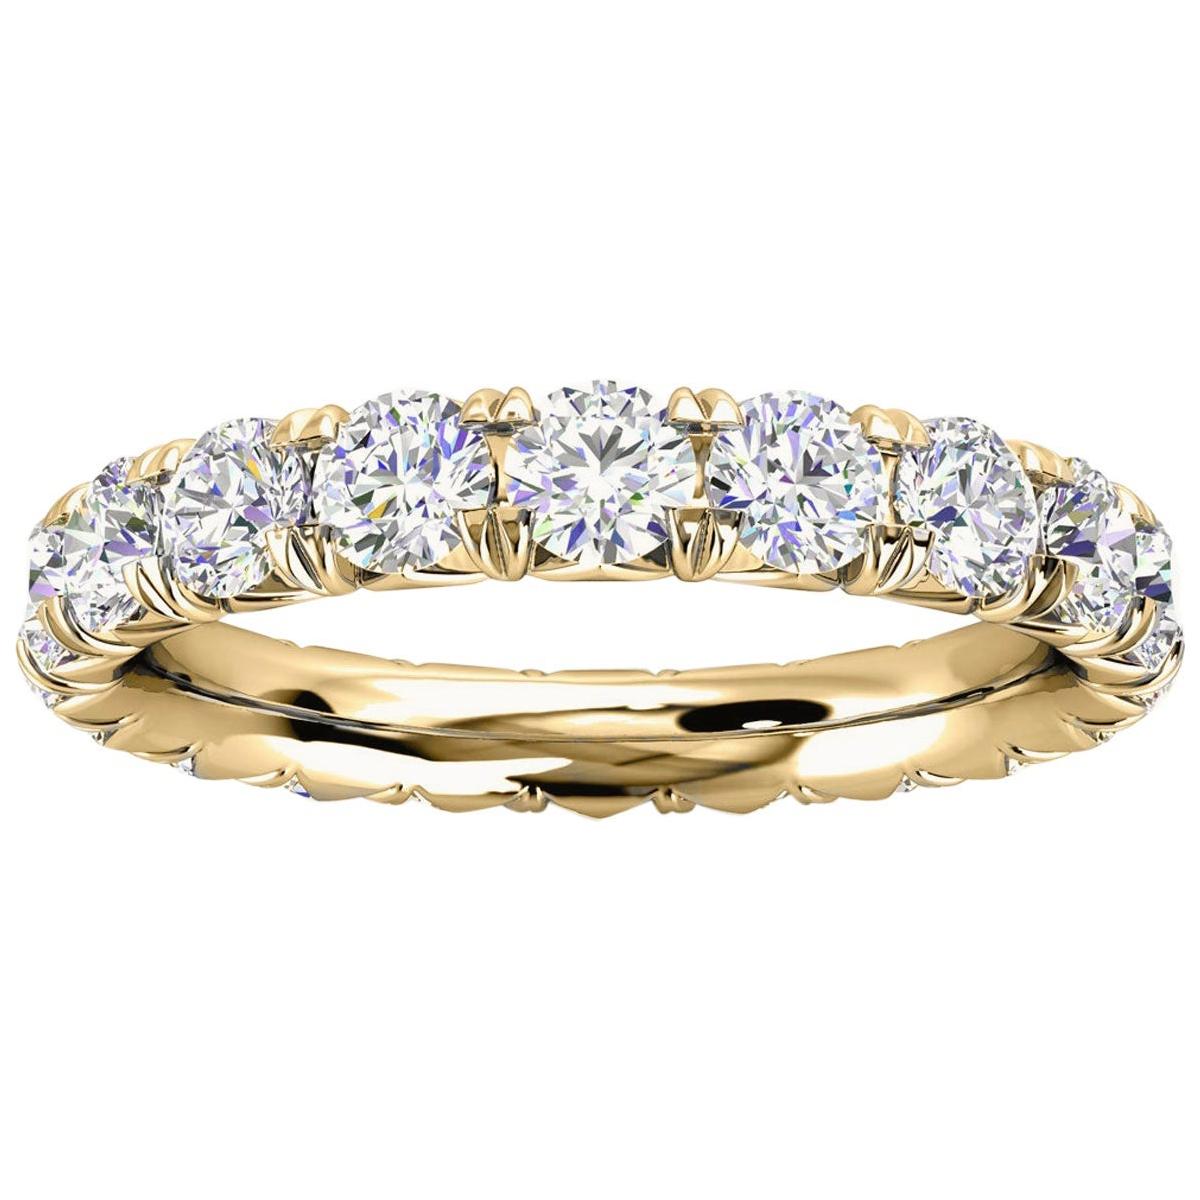 For Sale:  18K Yellow Gold Mia French Pave Diamond Eternity Ring '2 Ct. Tw'